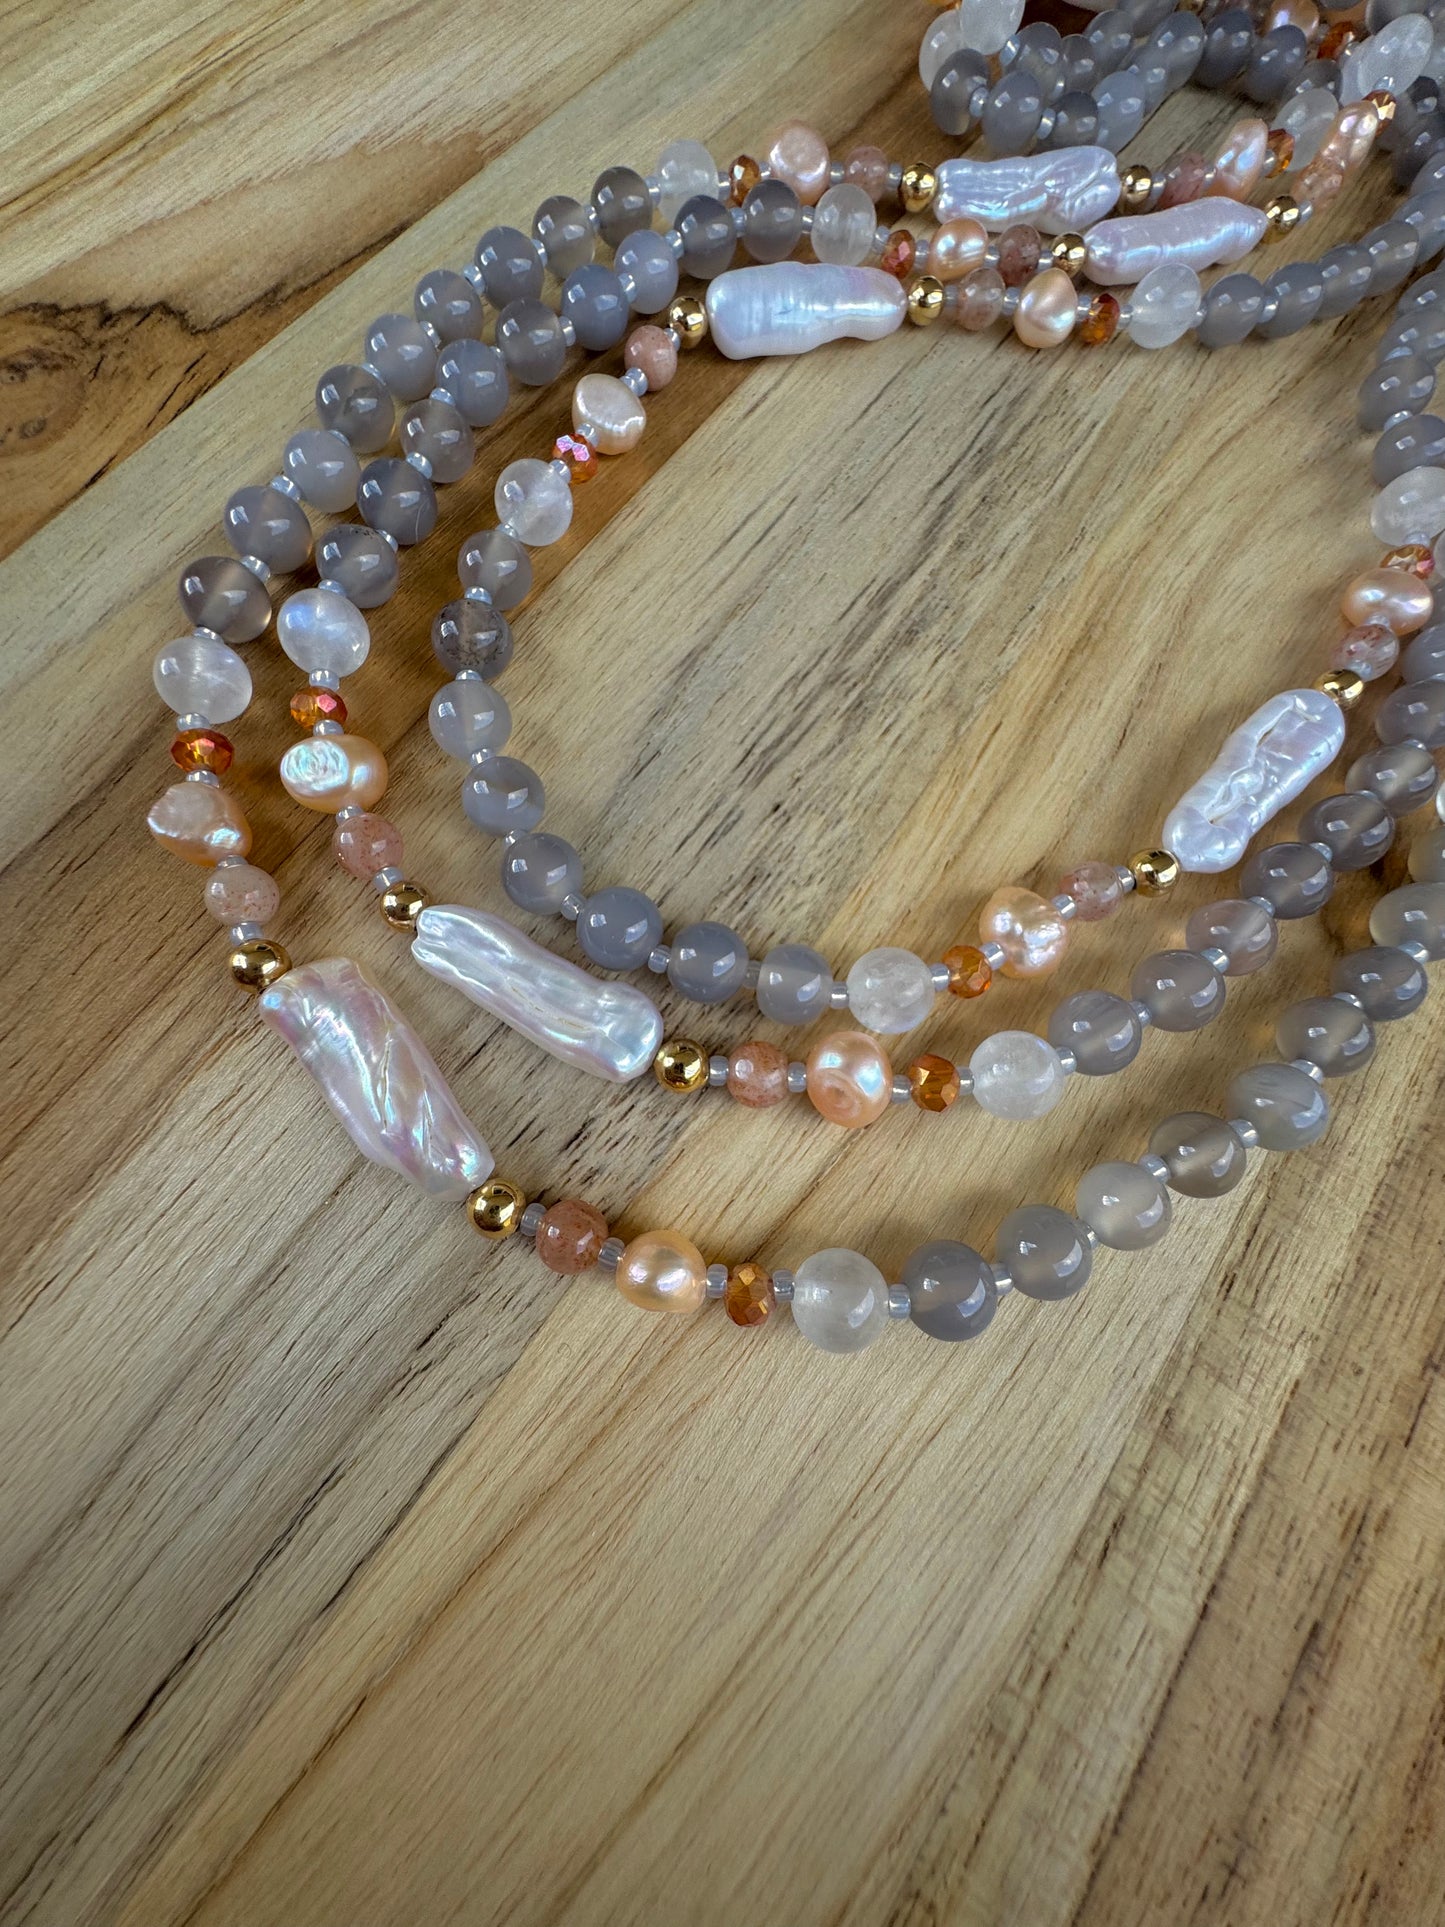 Extra Long 60” Biwa Stick Pearl Beaded Necklace with Grey Agate Moonstone Peach Pearl Peach Strawberry Quartz and Crystal Beads